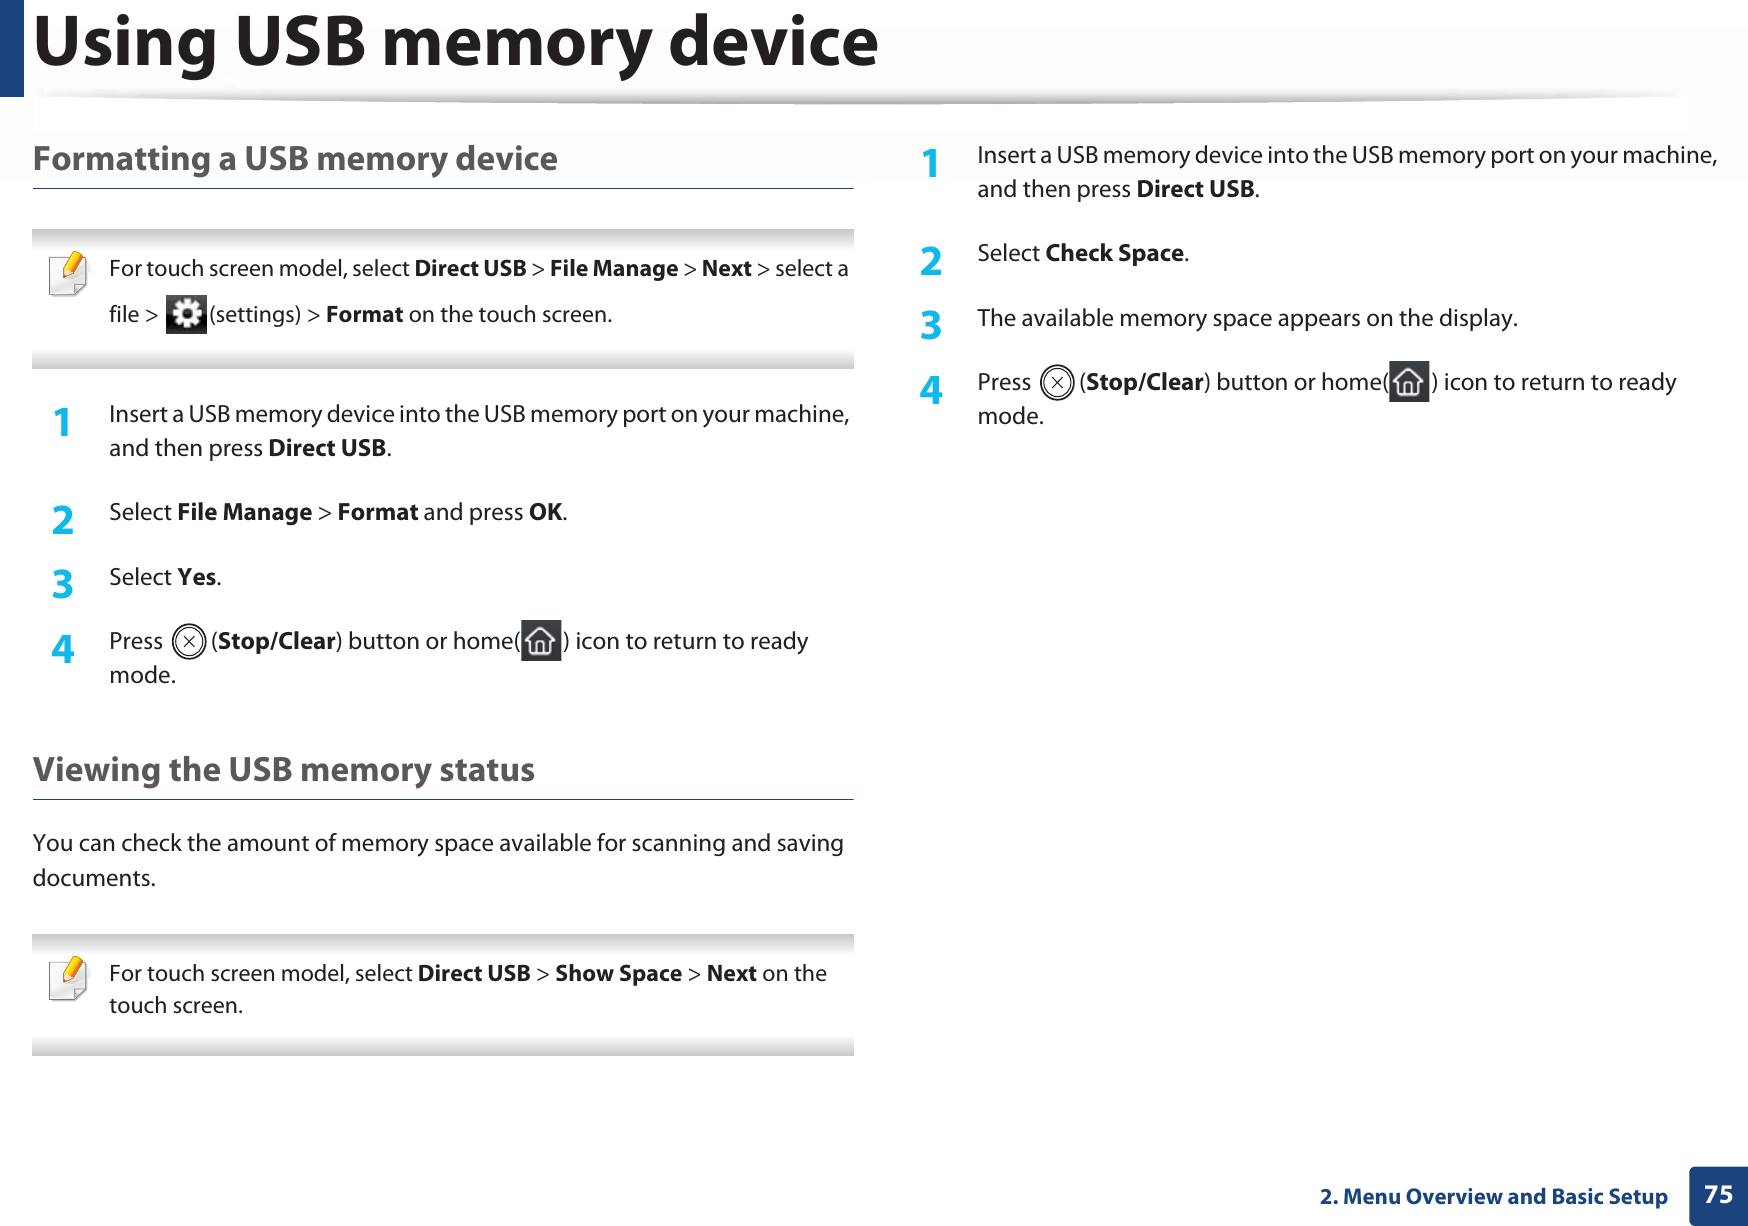 Using USB memory device752. Menu Overview and Basic SetupFormatting a USB memory device For touch screen model, select Direct USB &gt; File Manage &gt; Next &gt; select a file &gt;  (settings) &gt; Format on the touch screen. 1Insert a USB memory device into the USB memory port on your machine, and then press Direct USB.2  Select File Manage &gt; Format and press OK.3  Select Yes.4  Press (Stop/Clear) button or home( ) icon to return to ready mode.Viewing the USB memory statusYou can check the amount of memory space available for scanning and saving documents. For touch screen model, select Direct USB &gt; Show Space &gt; Next on the touch screen. 1Insert a USB memory device into the USB memory port on your machine, and then press Direct USB.2  Select Check Space.3  The available memory space appears on the display.4  Press (Stop/Clear) button or home( ) icon to return to ready mode.